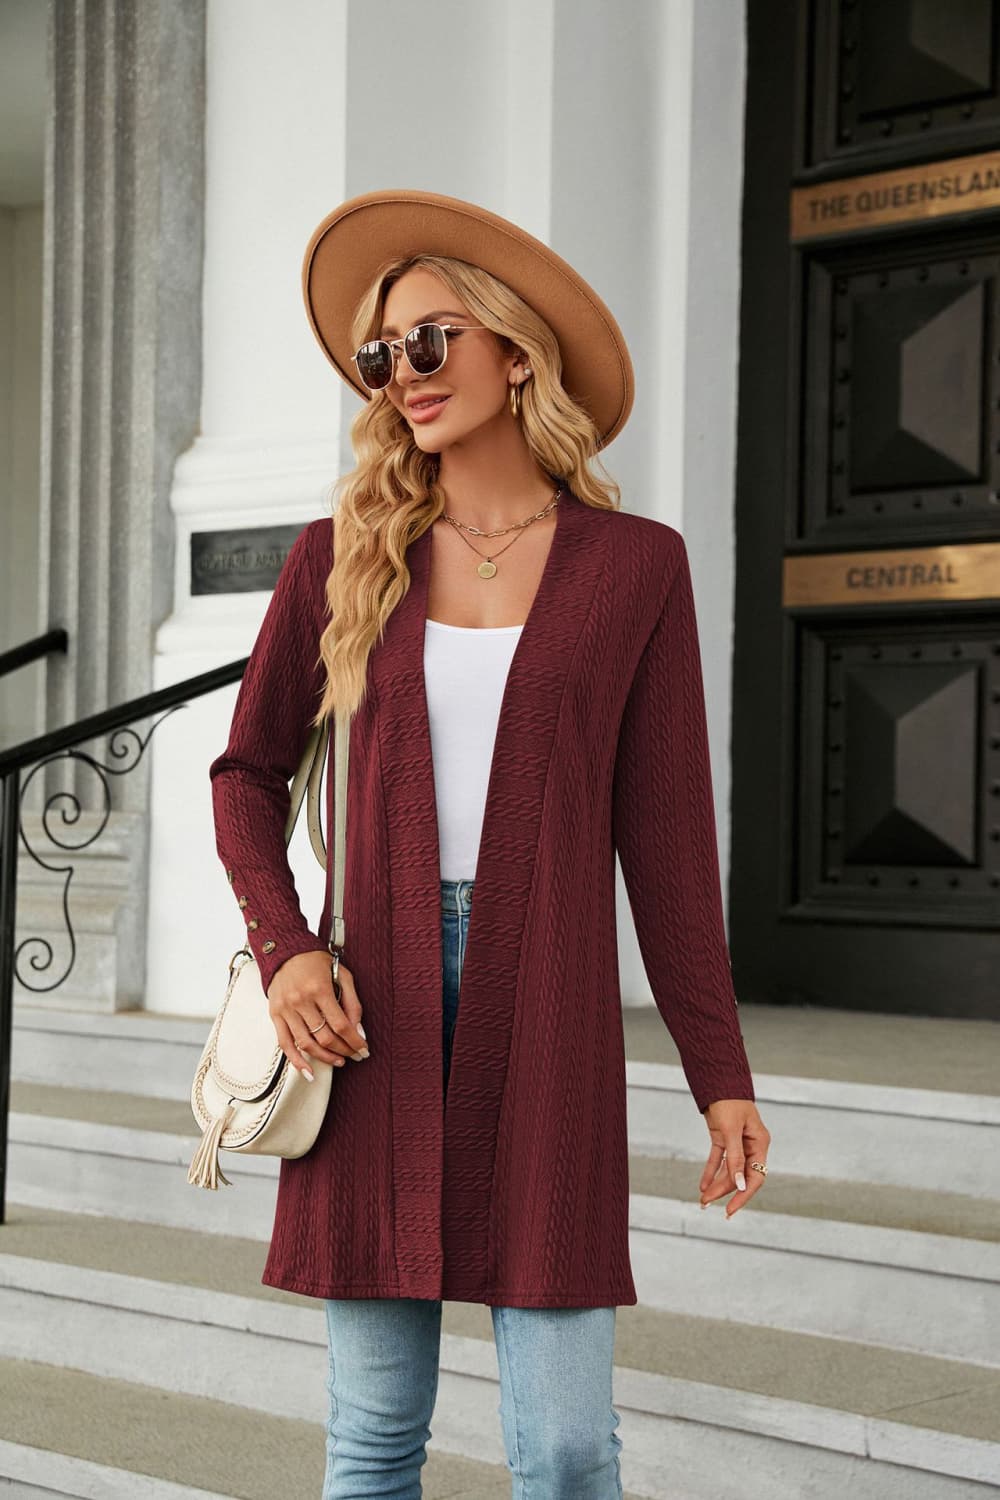 Long Sleeve Open Front Cardigan - Dark Red / S - Women’s Clothing & Accessories - Shirts & Tops - 16 - 2024